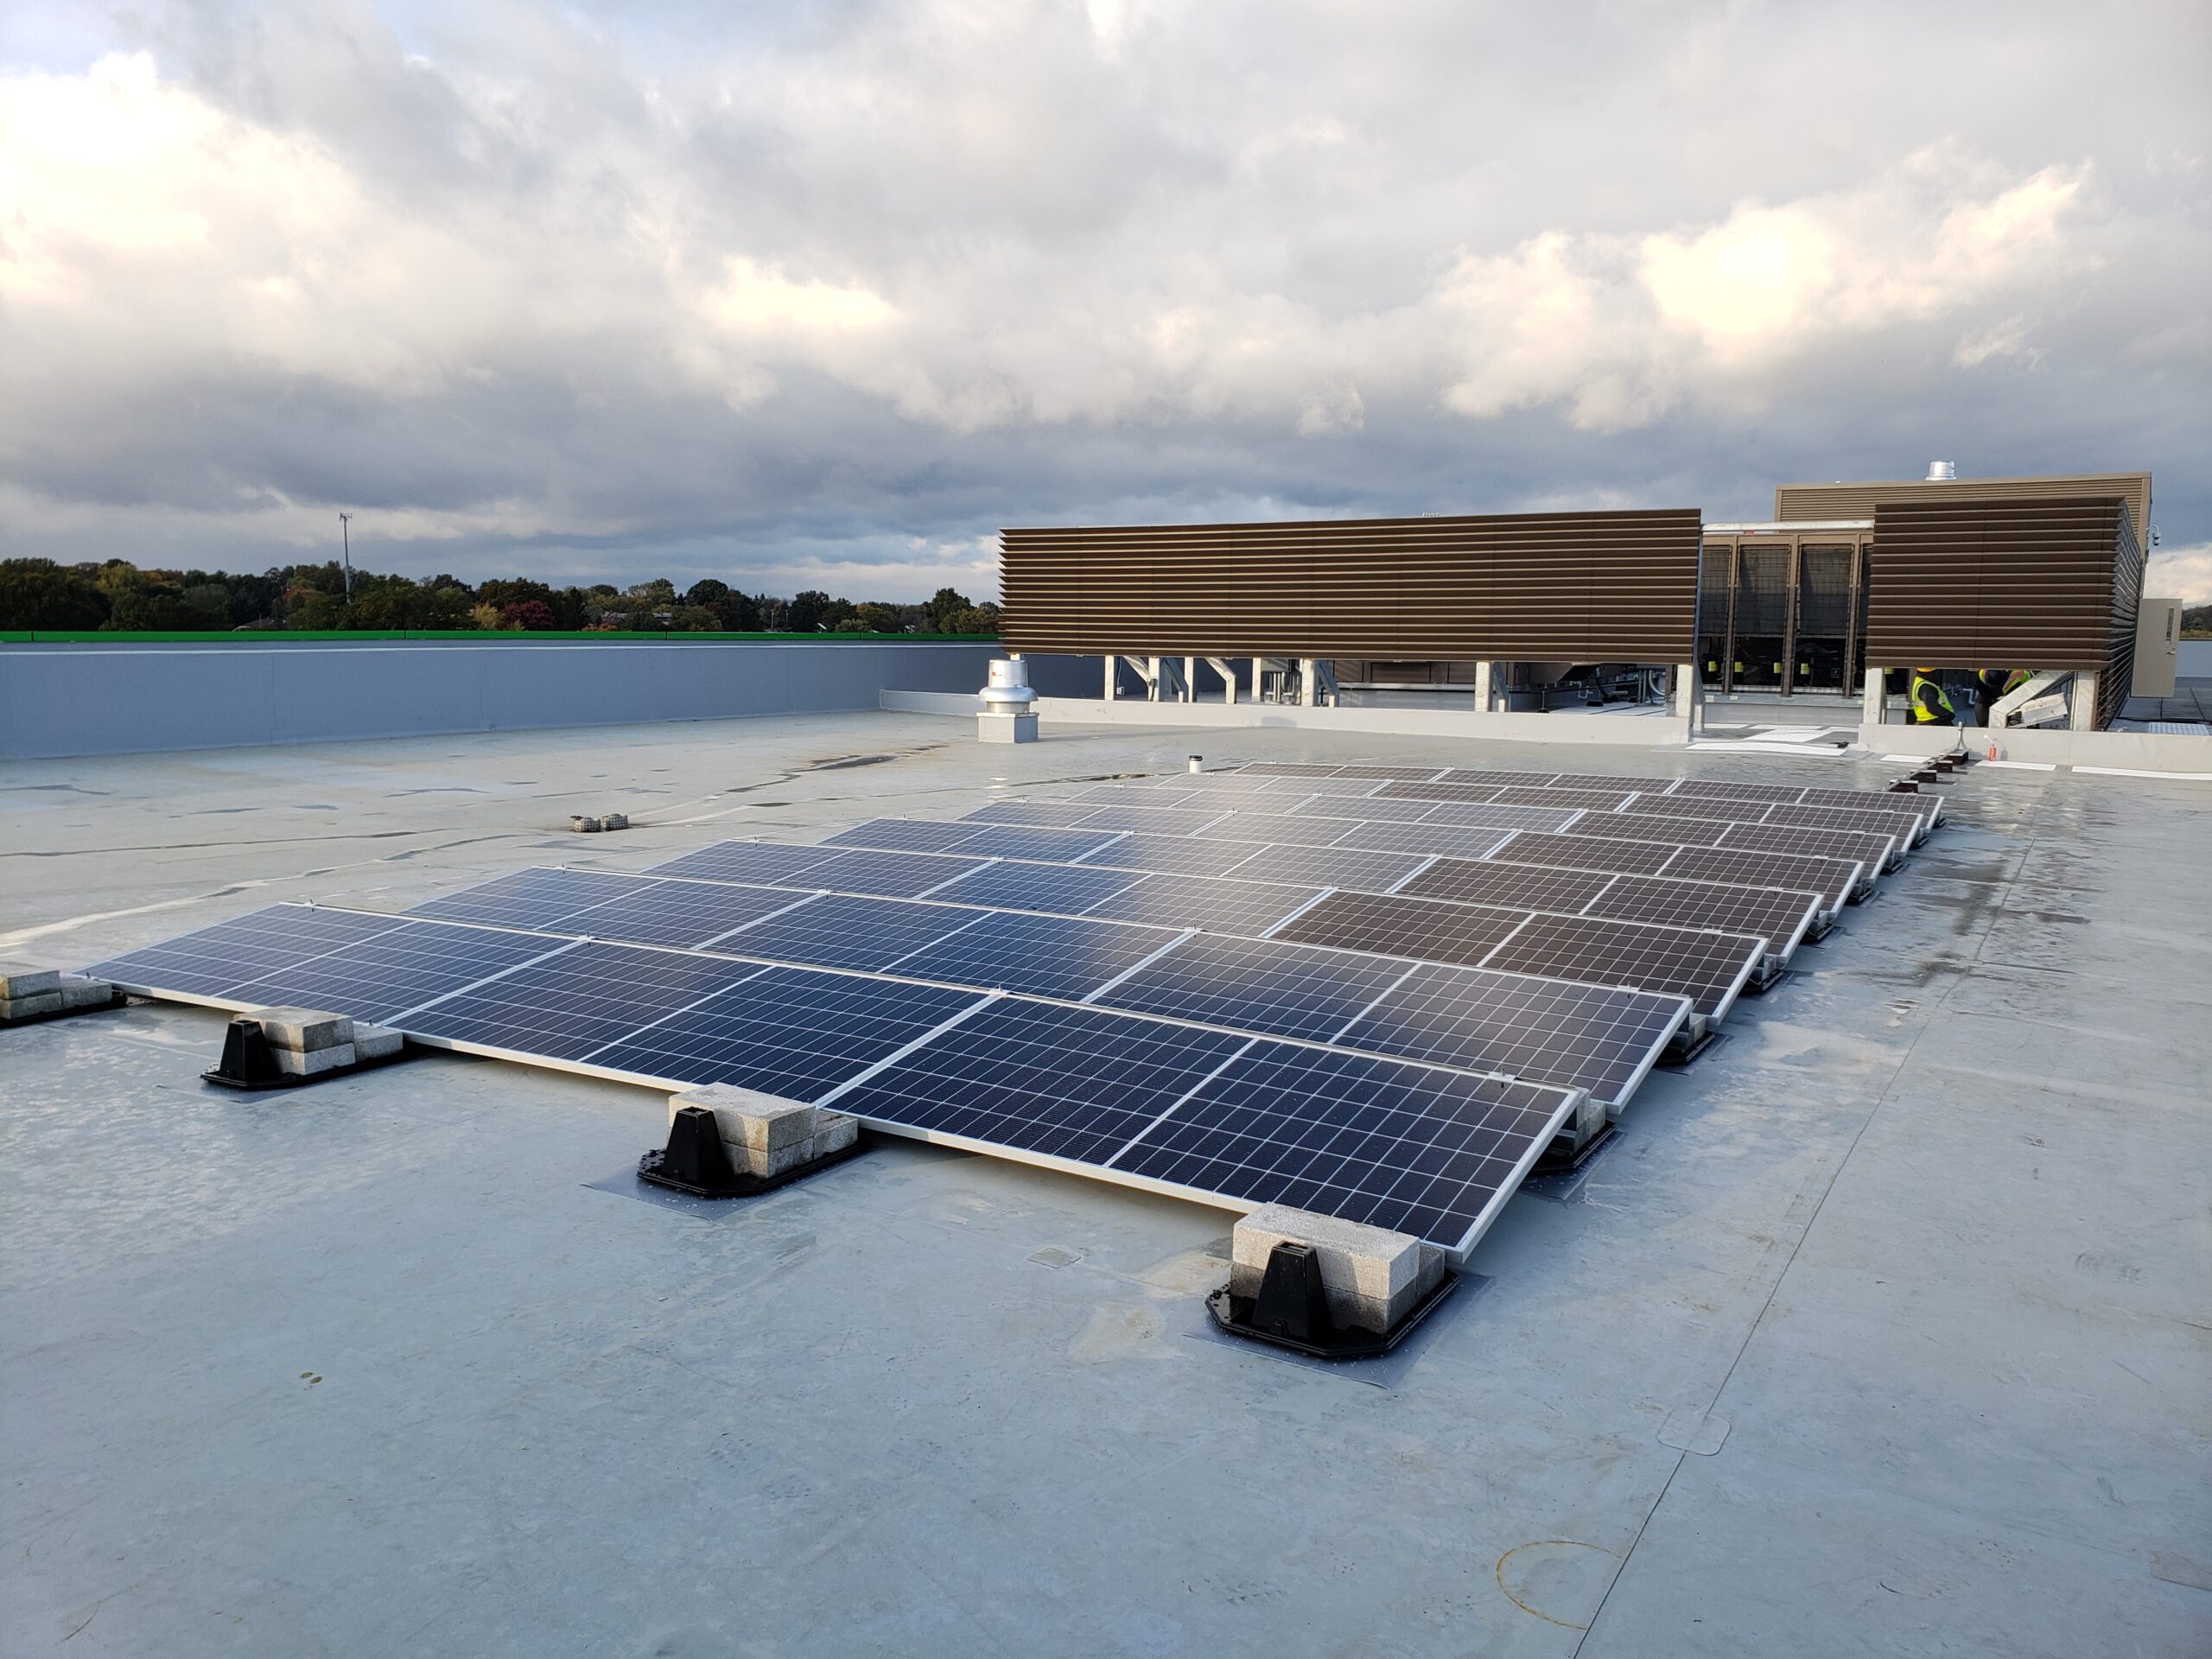 Beautiful array of solar panels on a flat roof